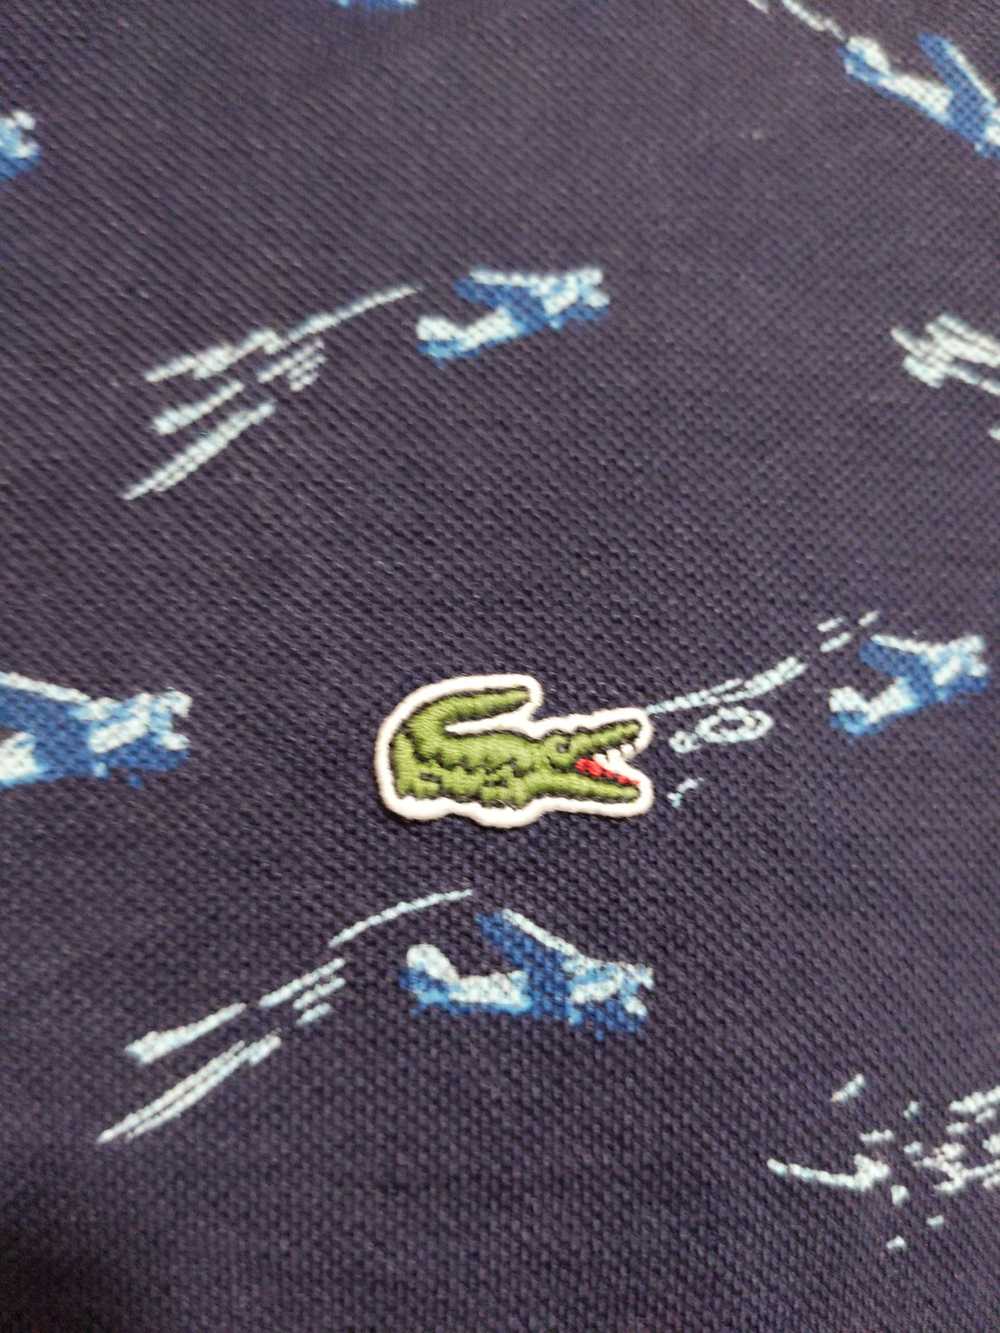 Lacoste Lacoste Airplane Print Cotton and Linen P… - image 3